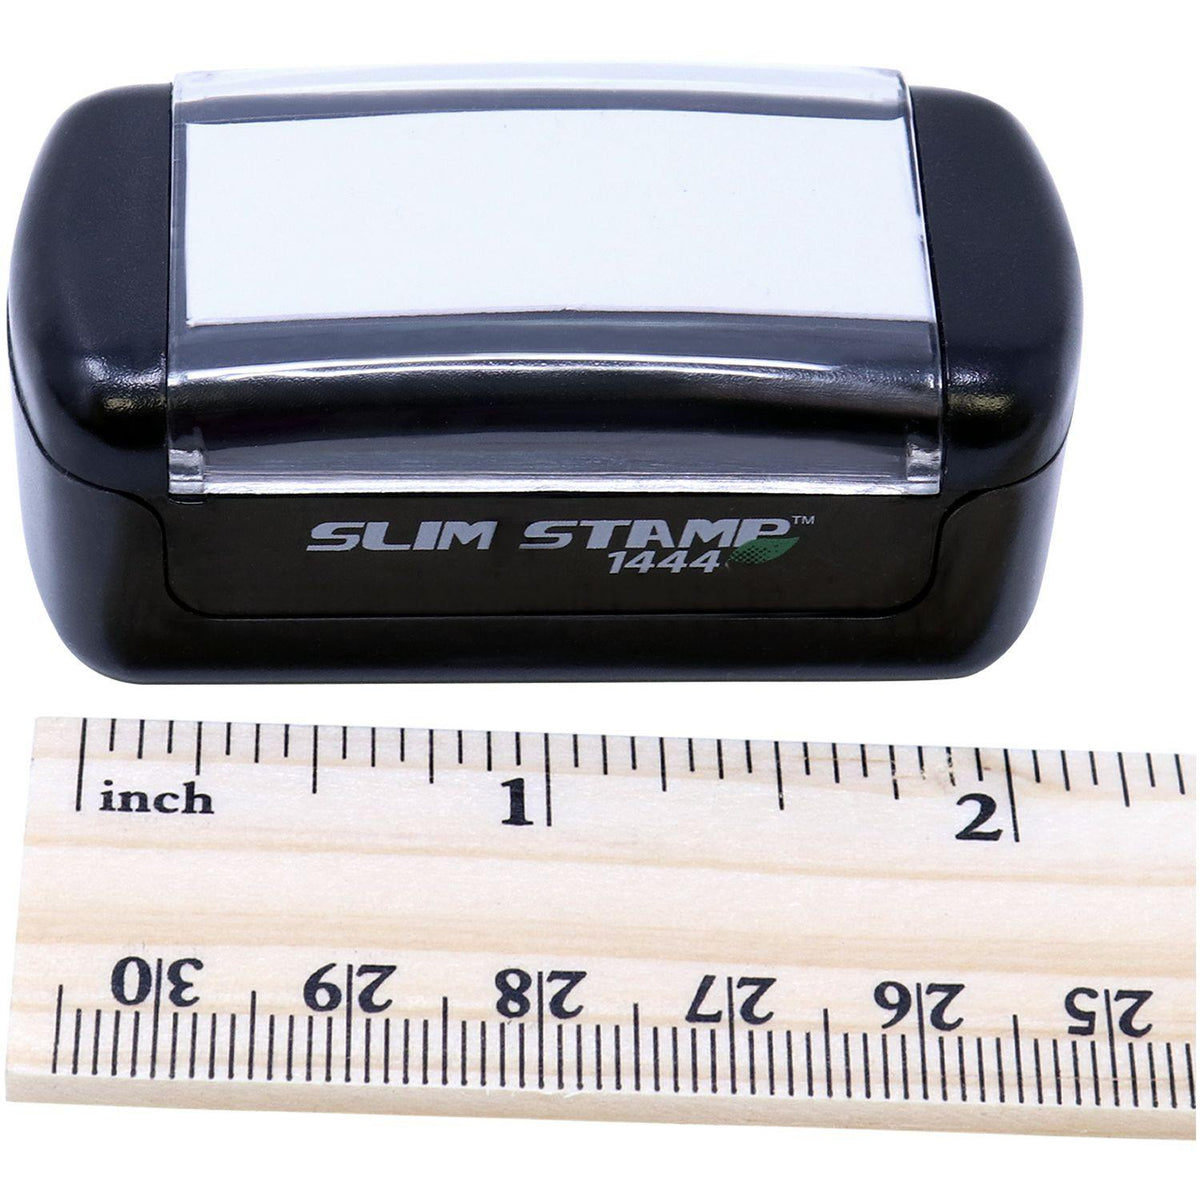 Measurement Slim Pre-Inked Do Not Bend Stamp with Ruler